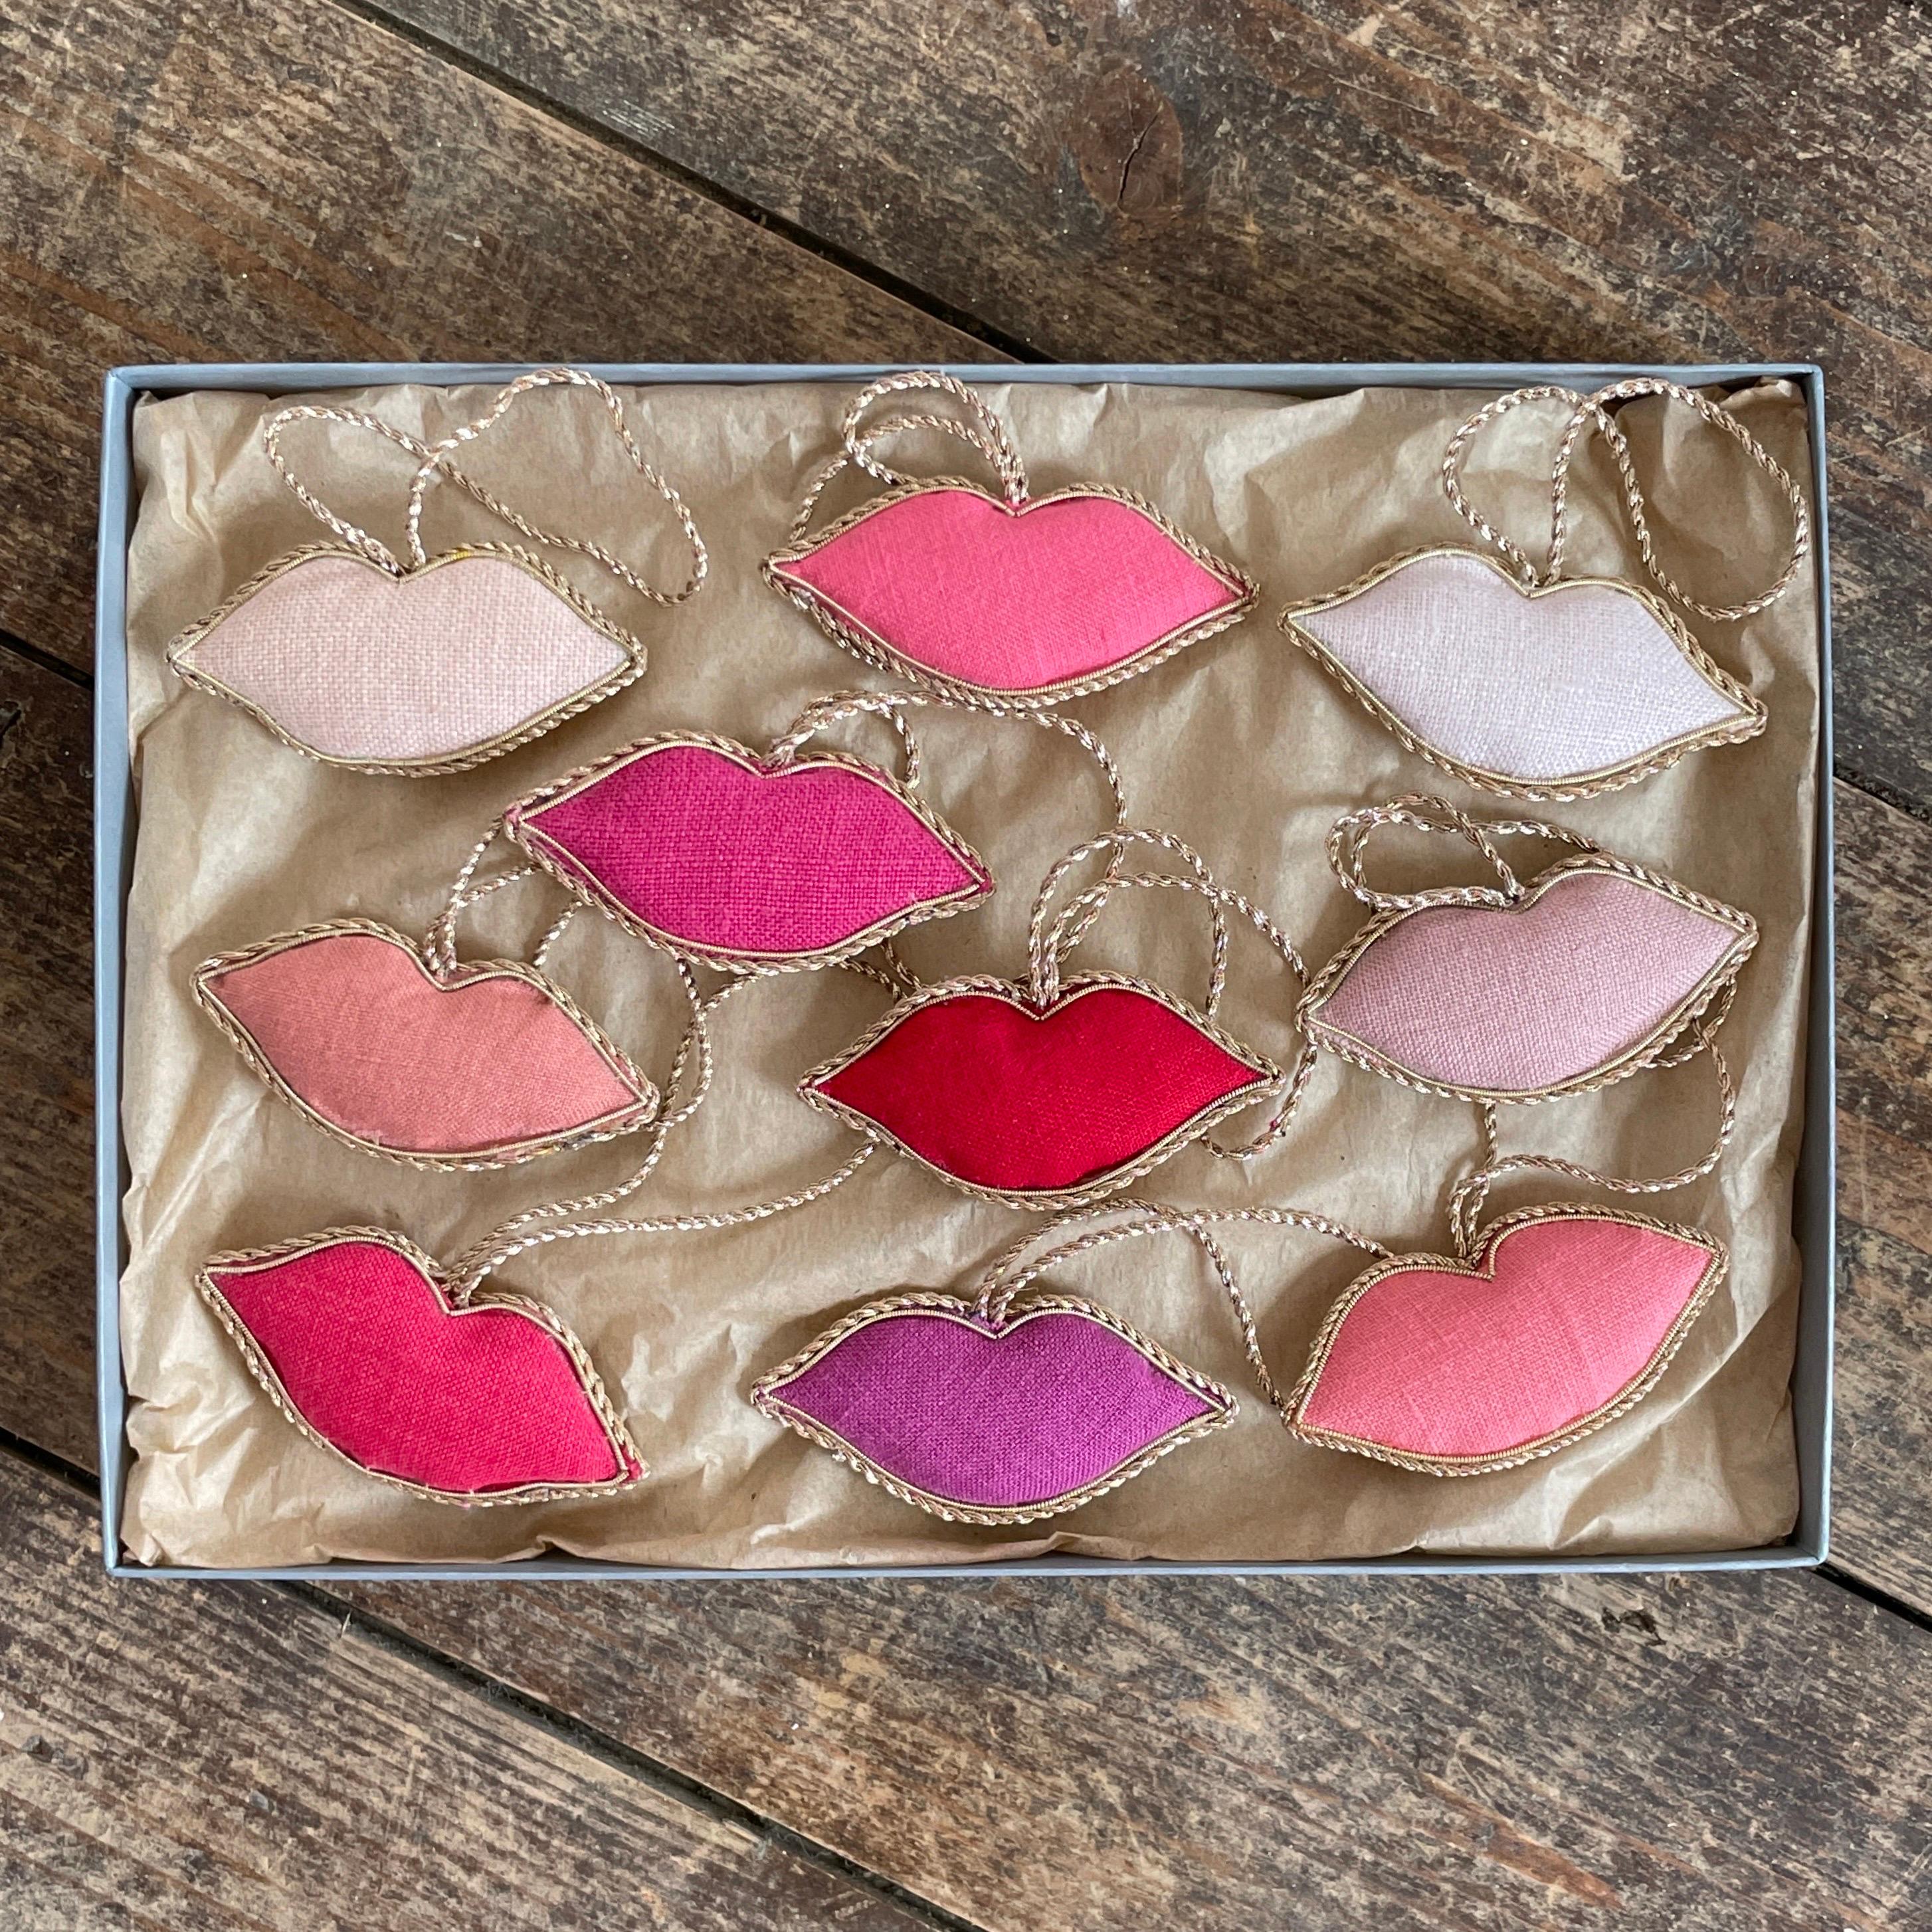 Hand-Crafted Set of 10 Limited Edition Artisan Irish Linen Lips Ornament Pink Red Valentine For Sale